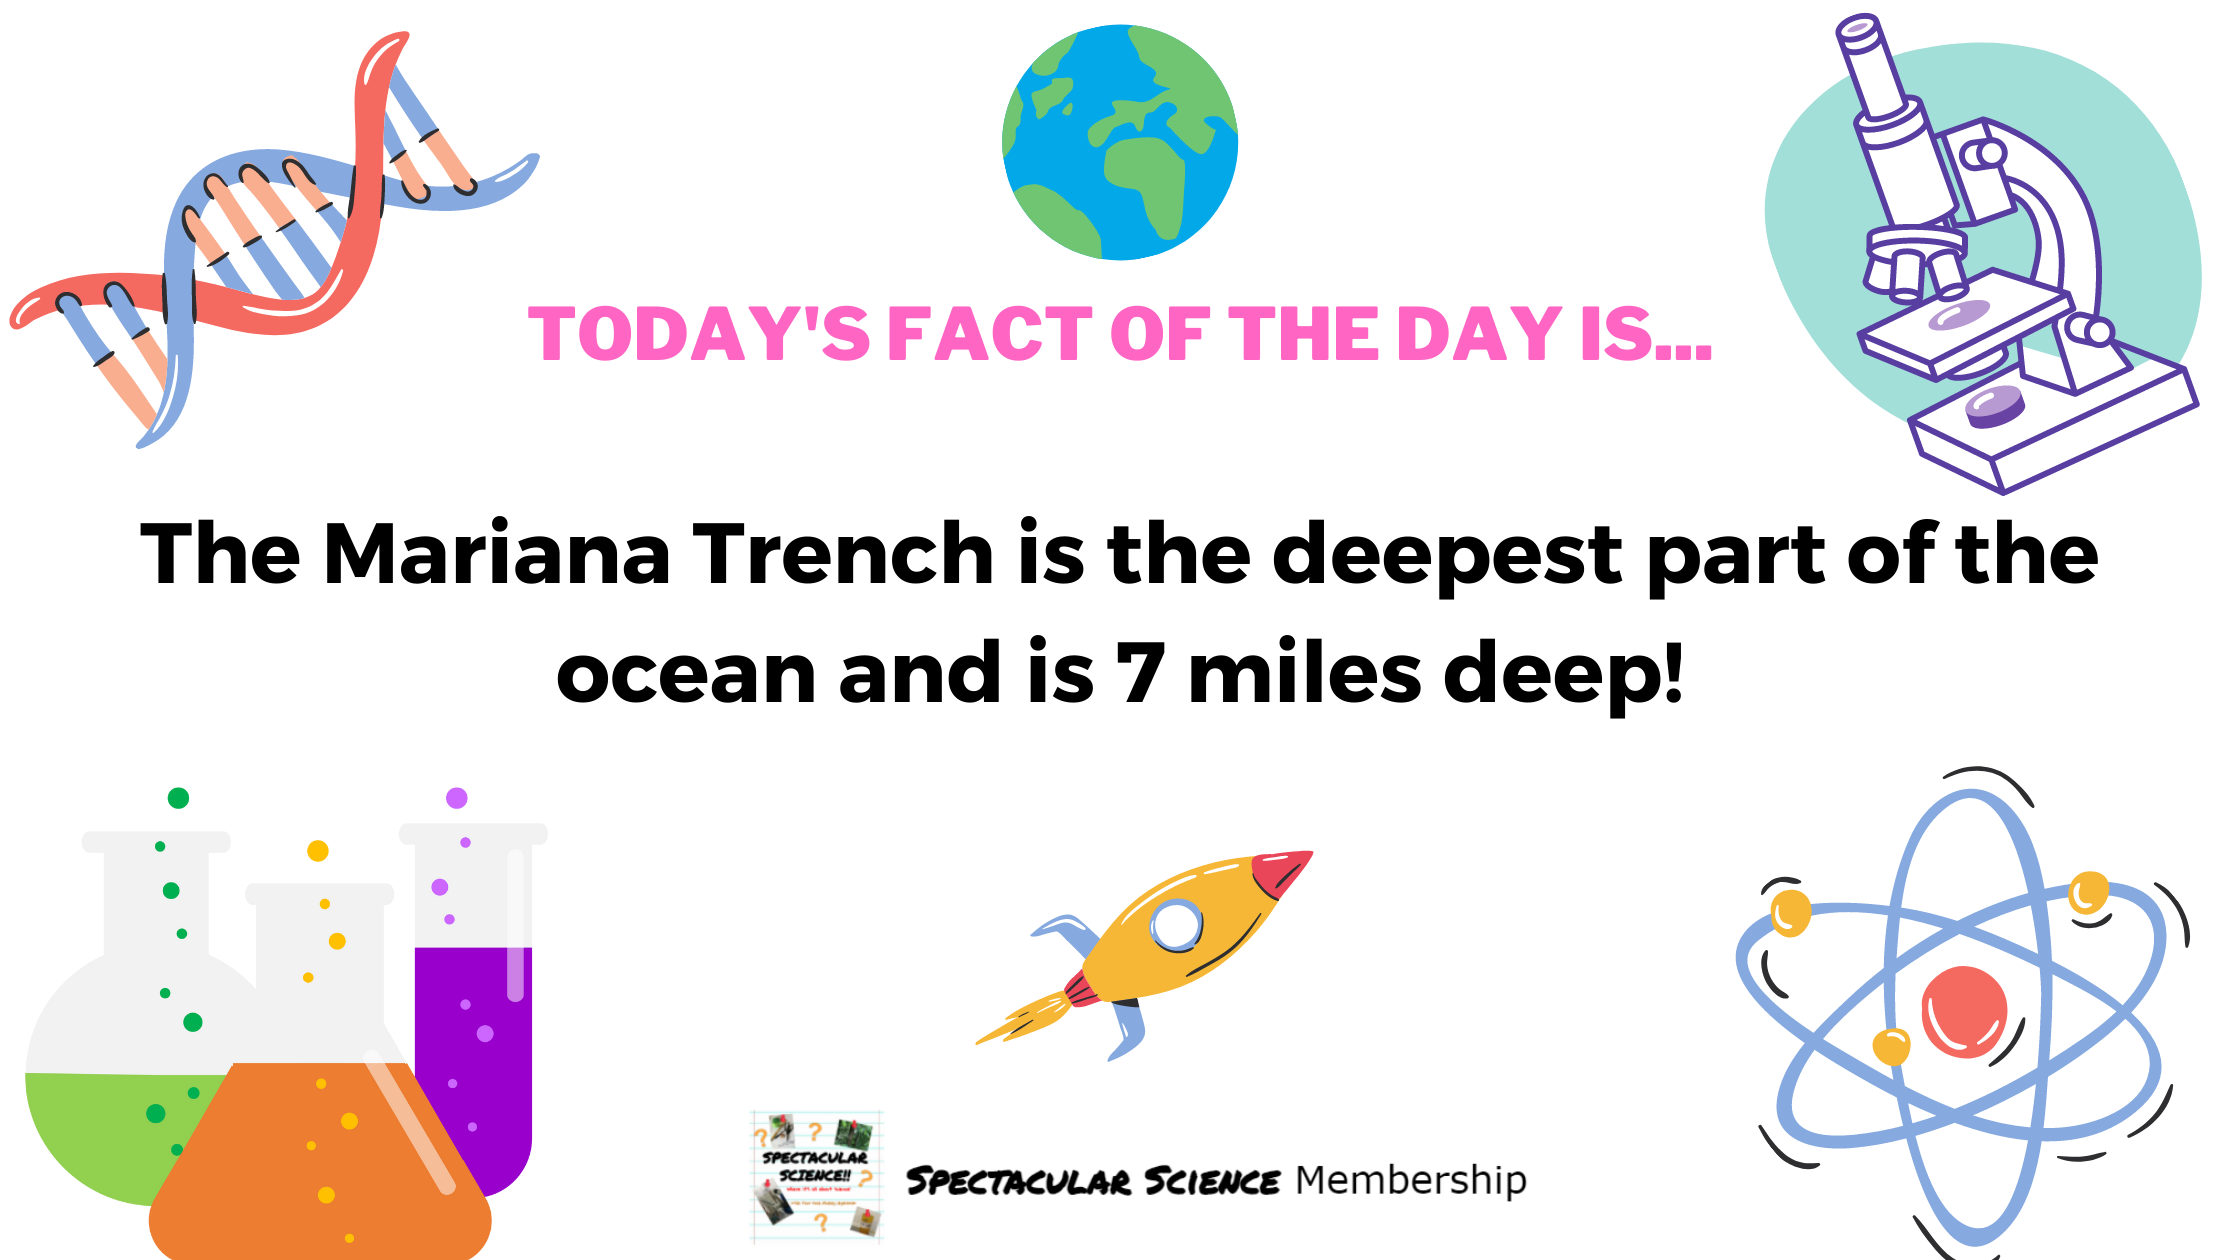 Fact of the Day Image Jan. 27th